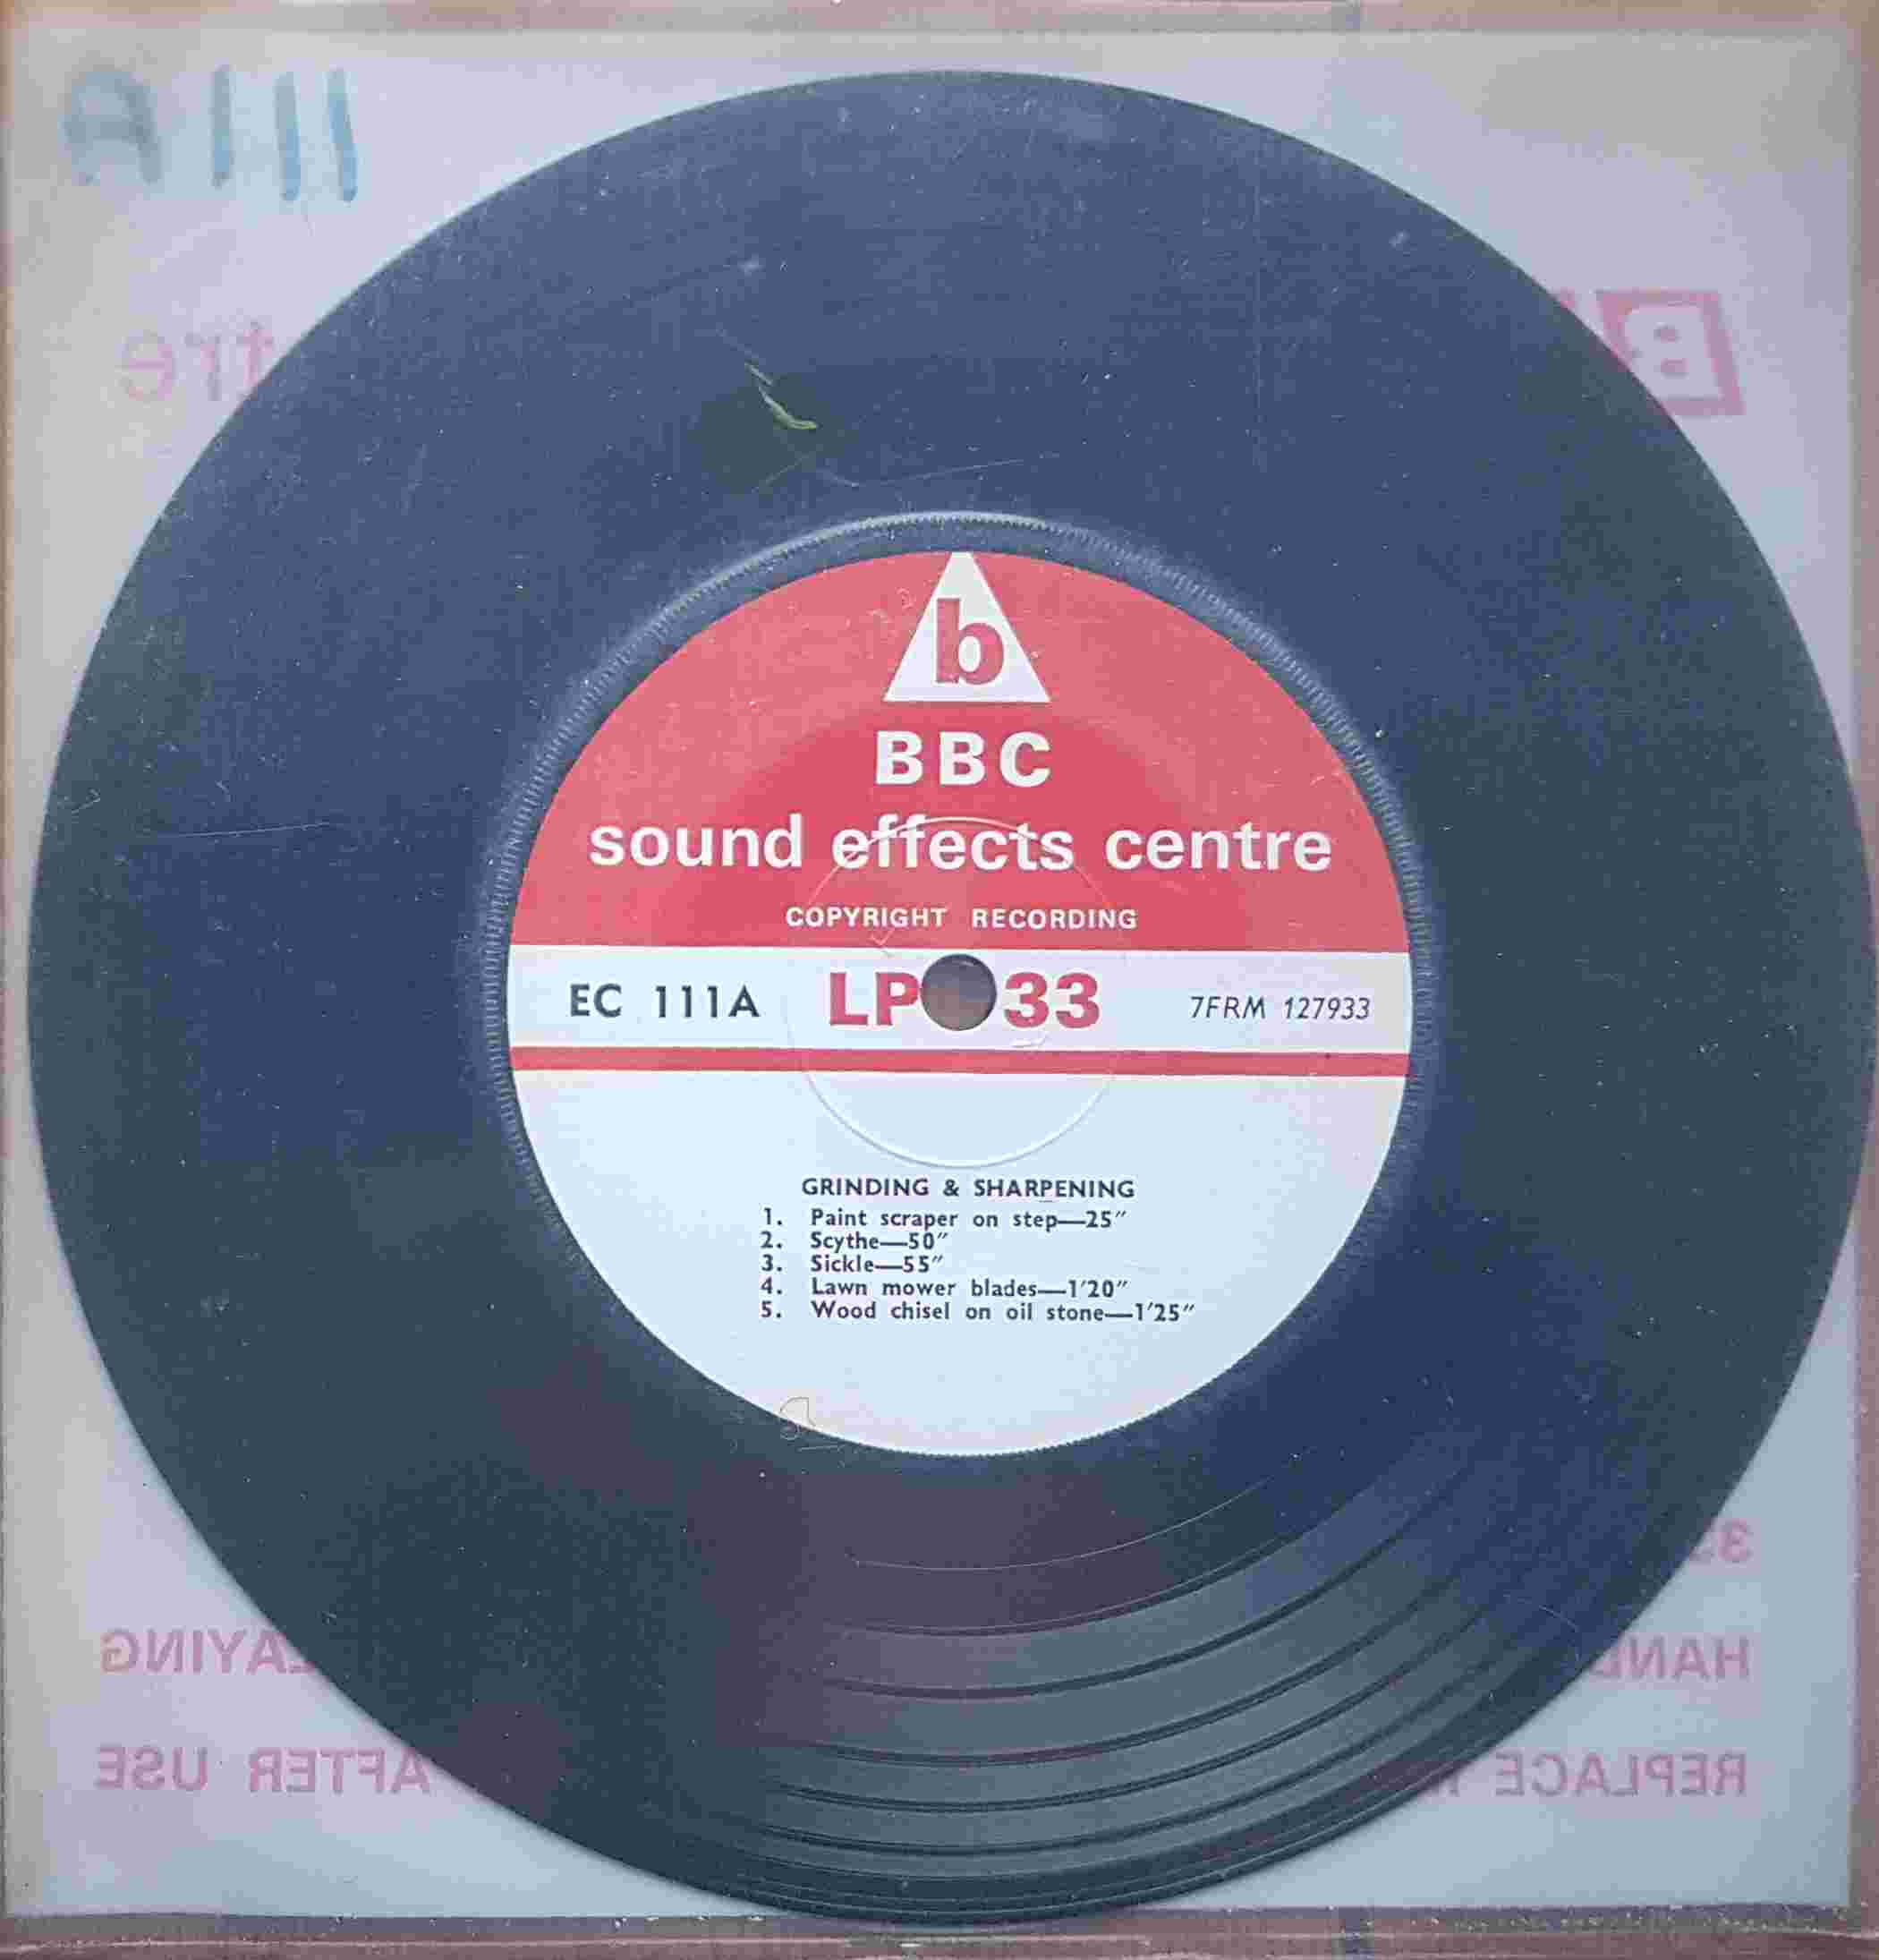 Picture of EC 111A Grinding & sharpening by artist Not registered from the BBC records and Tapes library